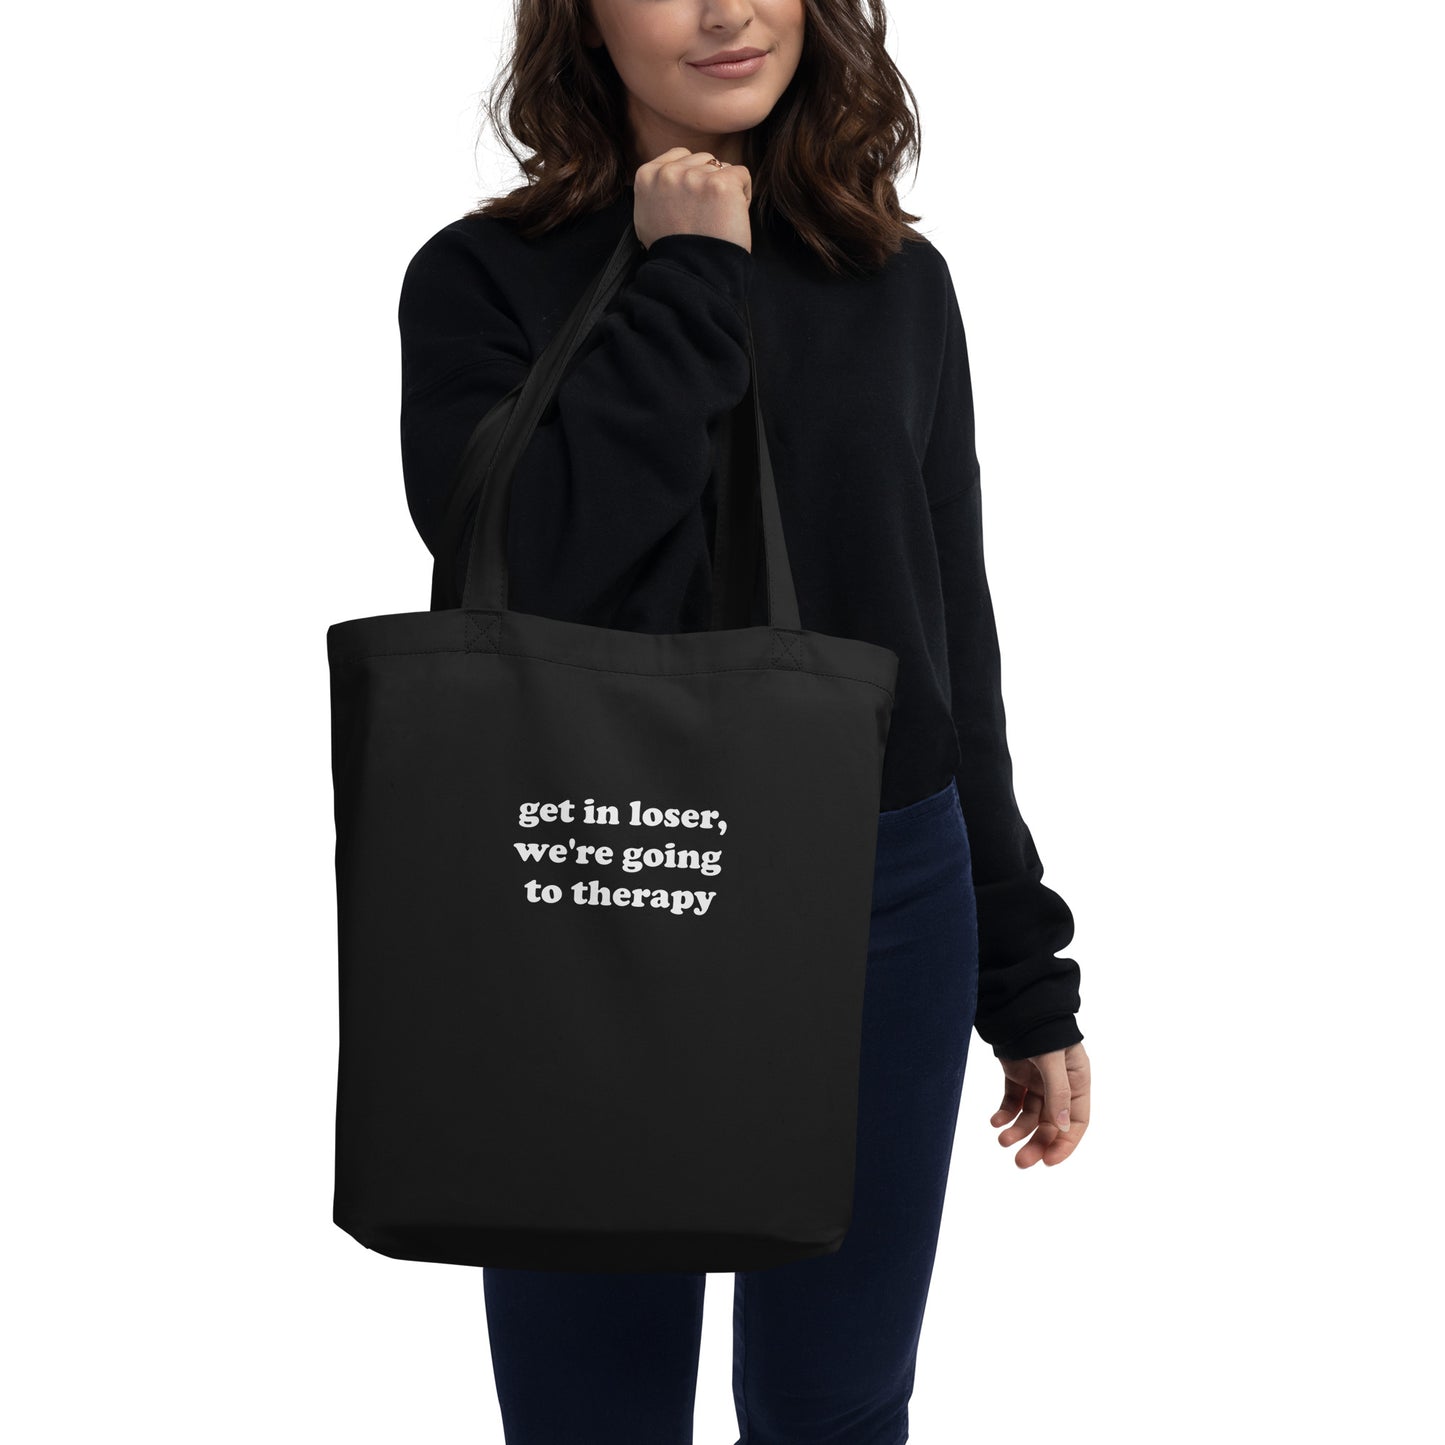 Get In Loser, We're Going to Therapy Tote Bag